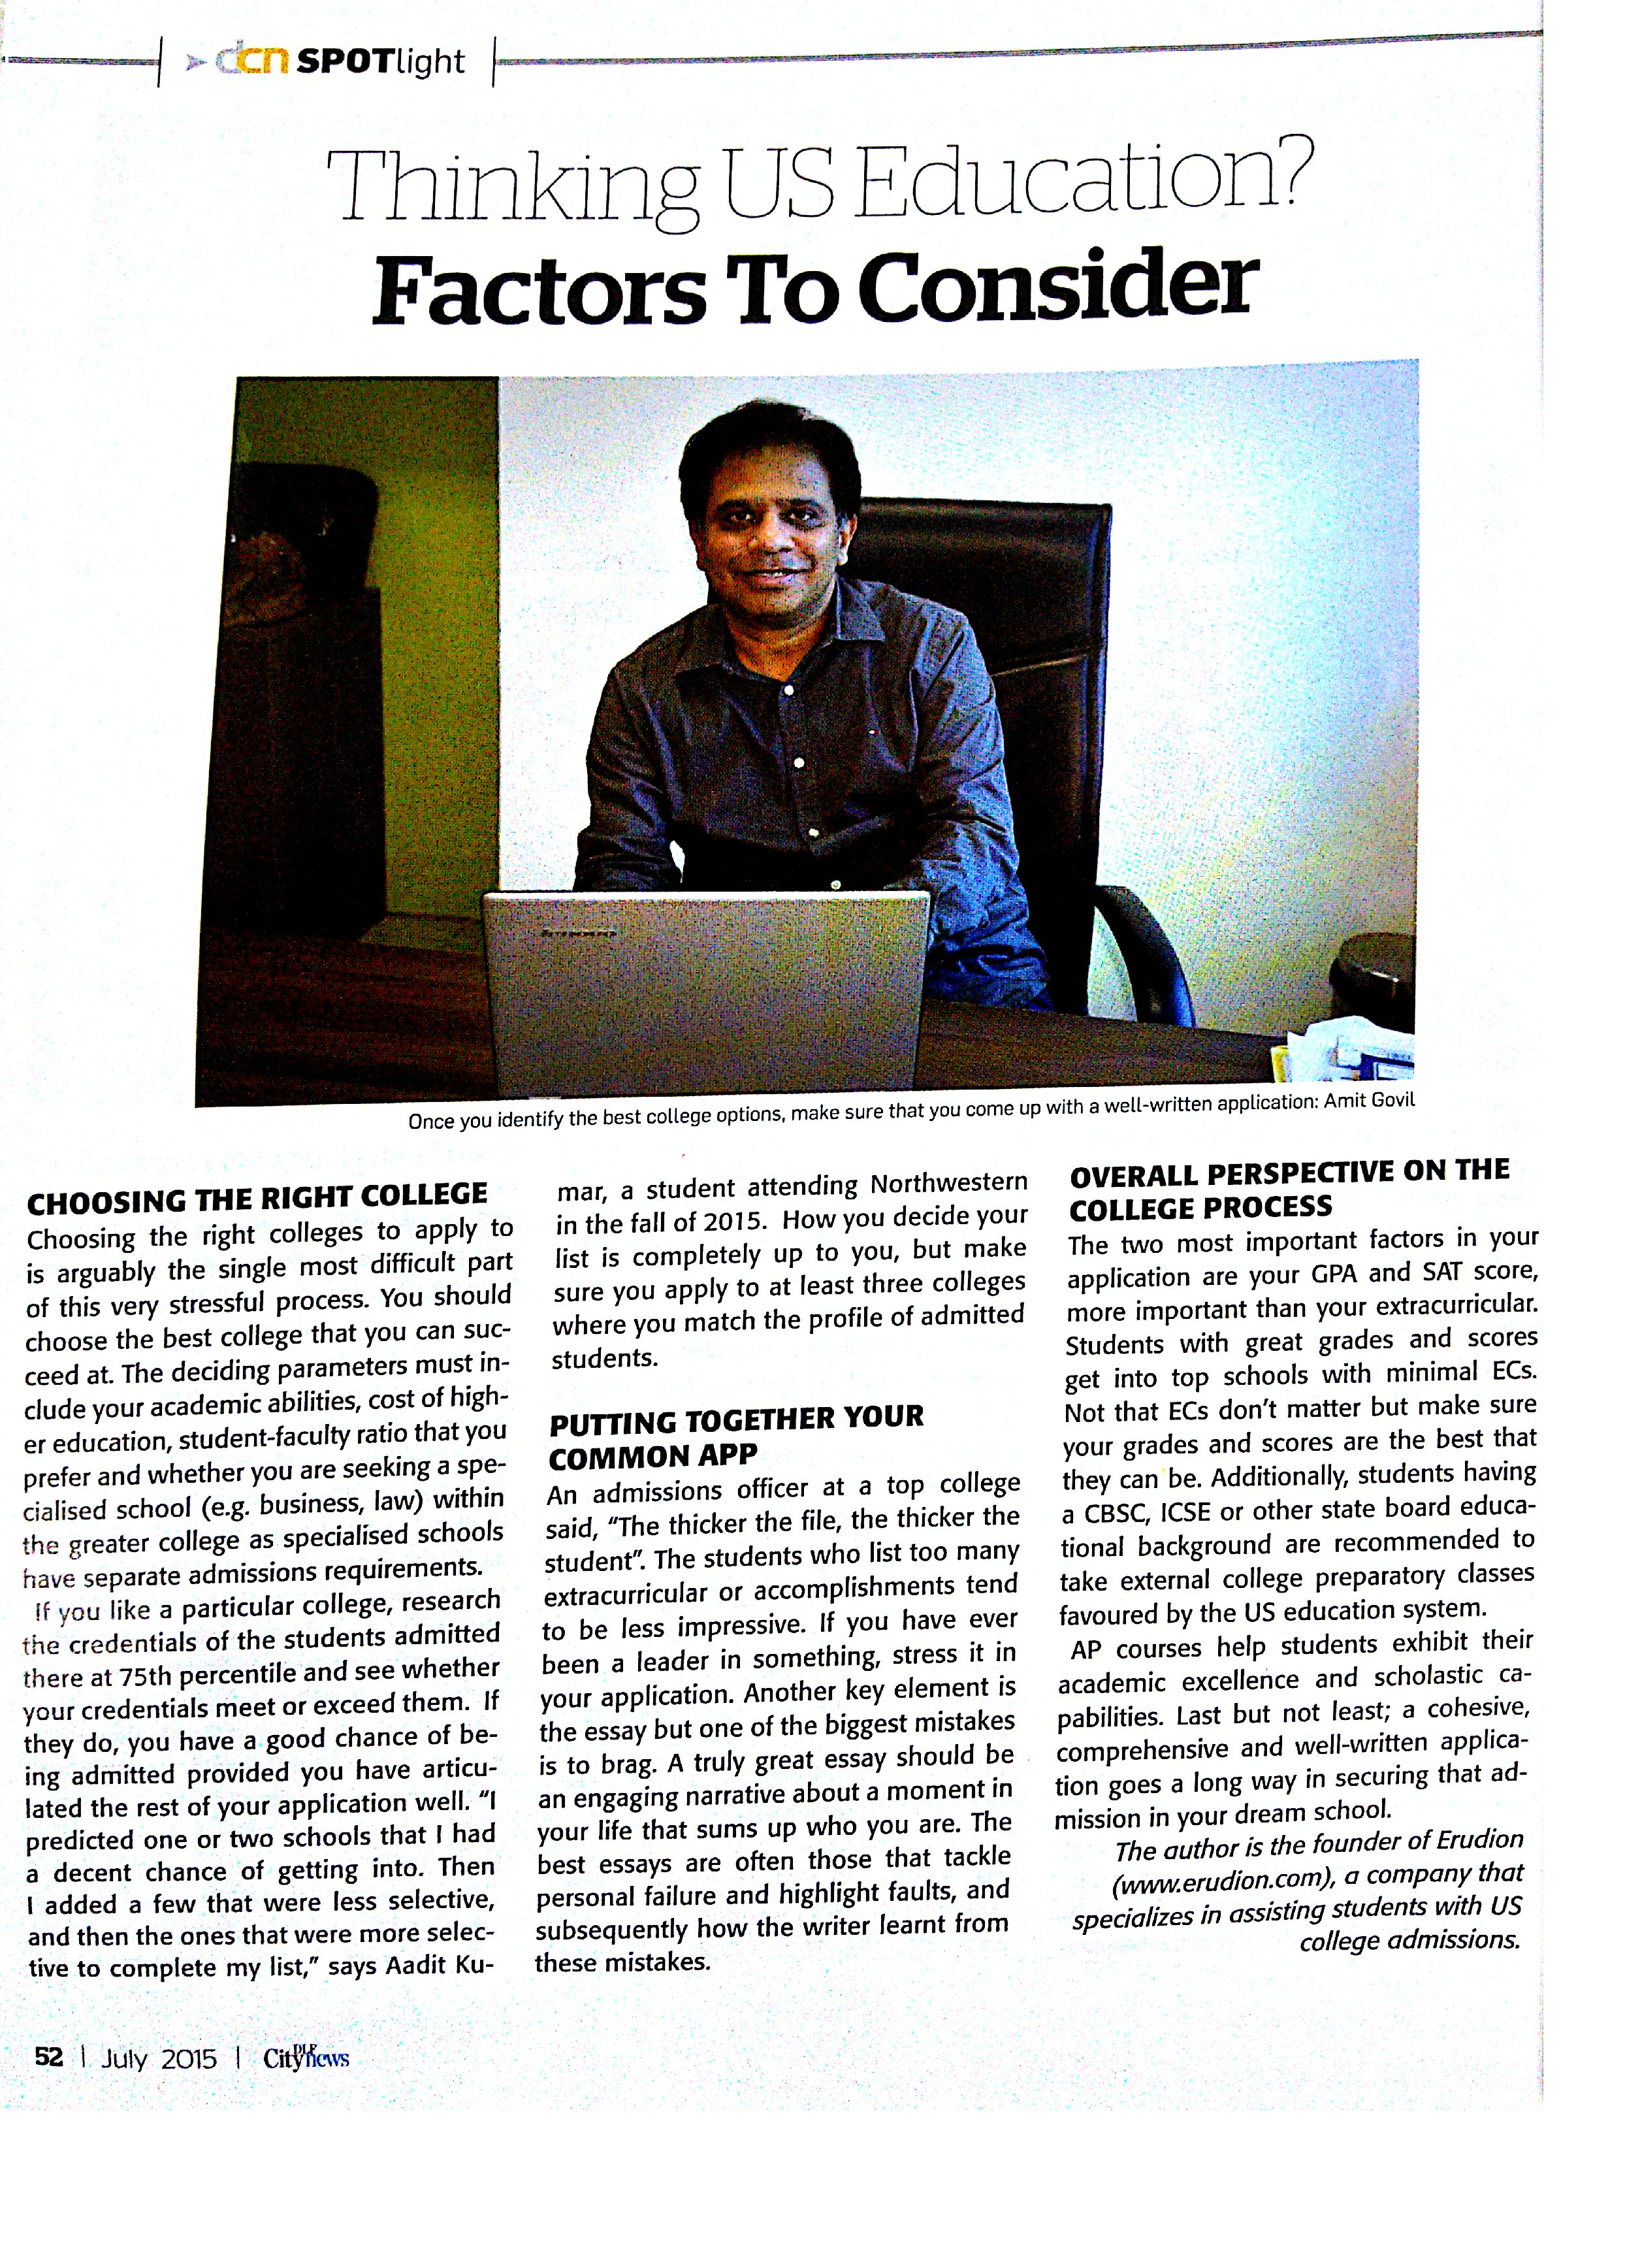 Erudion in the News – A glimpse of what our CEO, Amit Govil says about “Thinking US Education?”